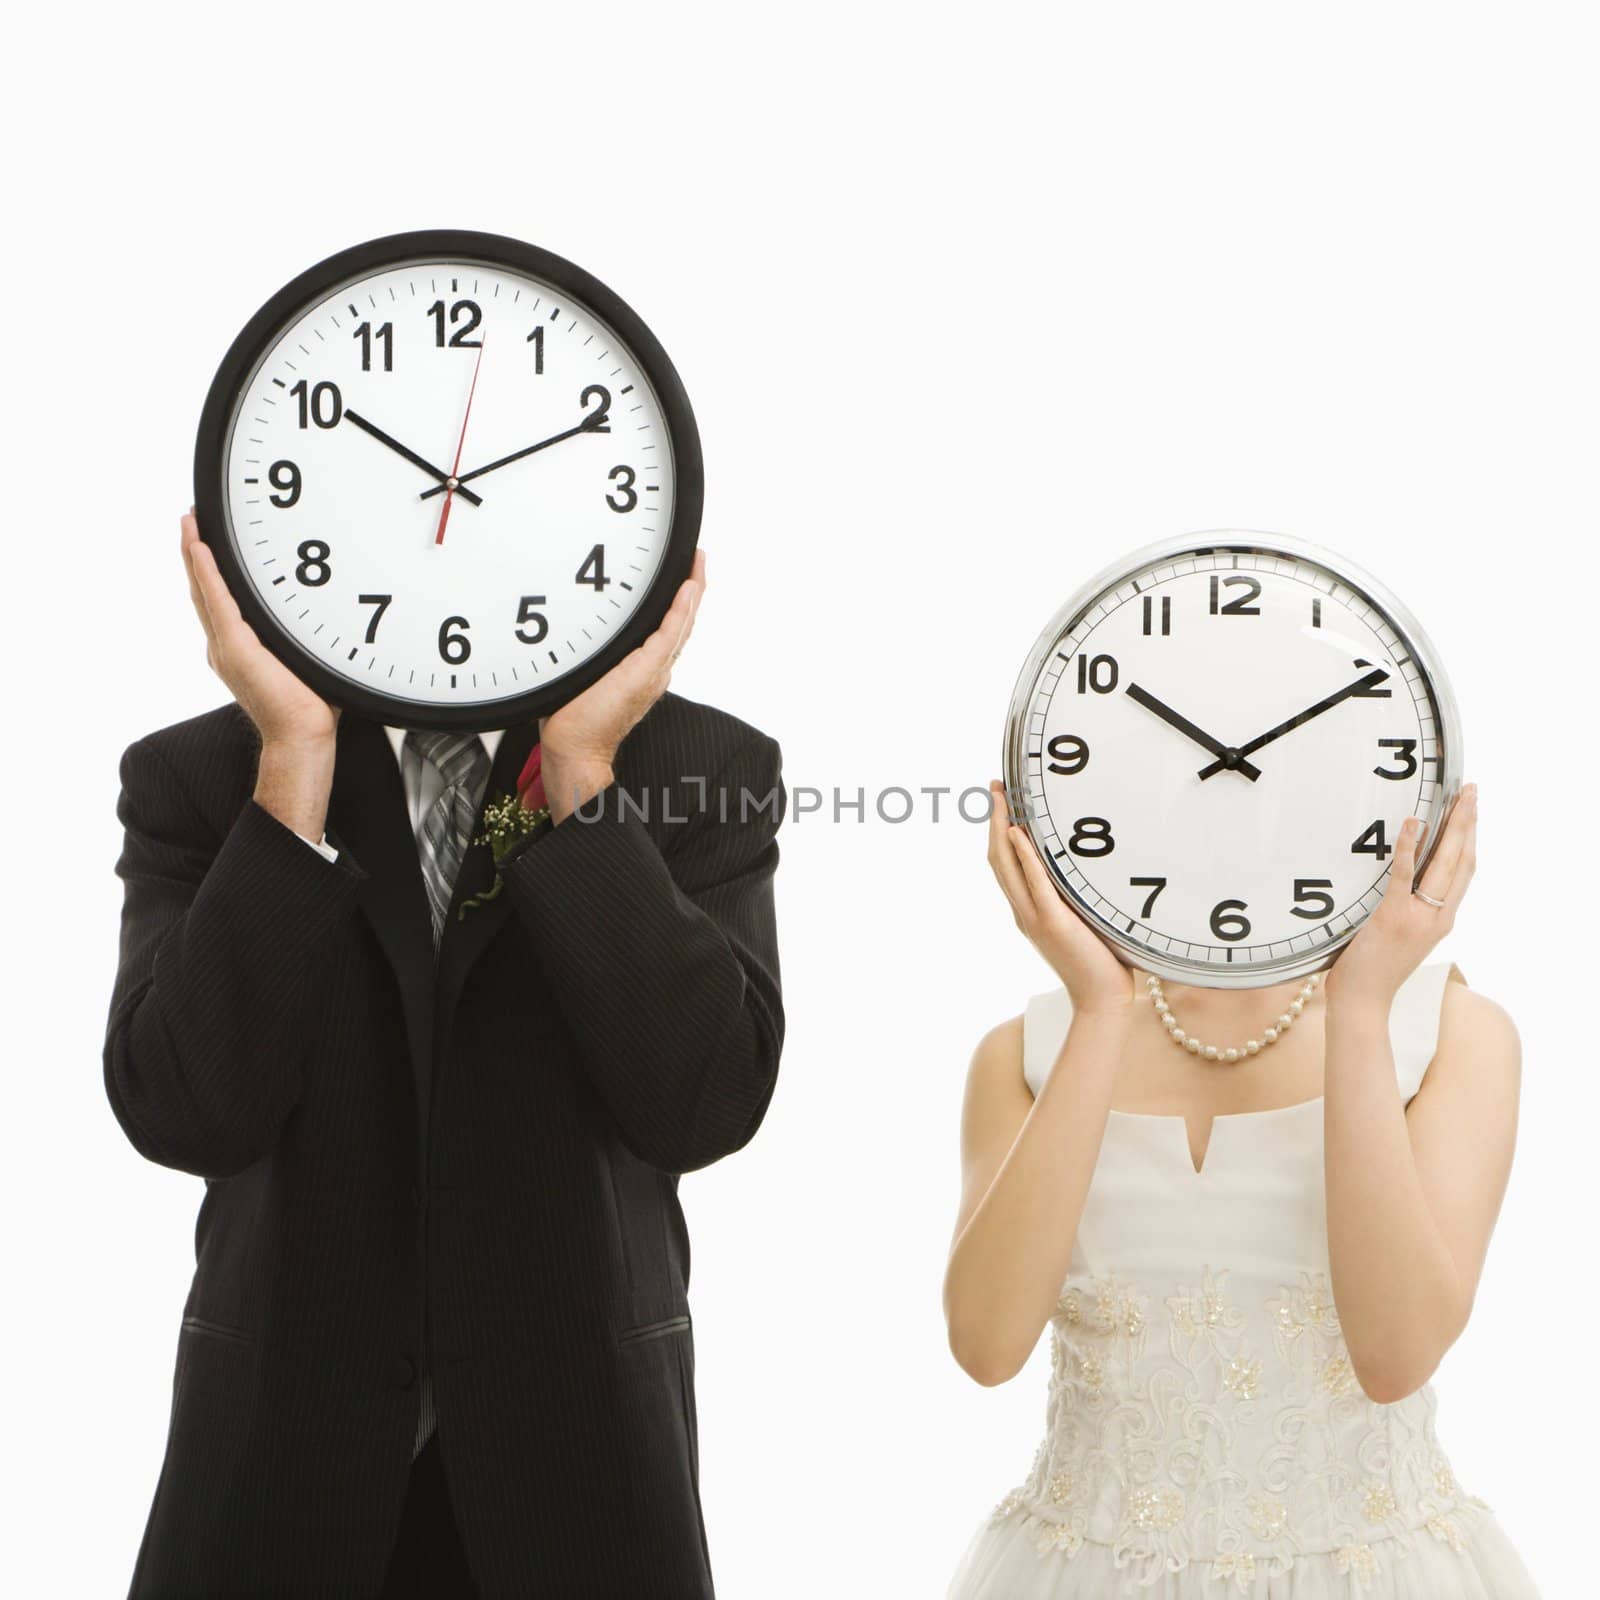 Portrait of Caucasian groom and Asian bride with clocks covering their faces.